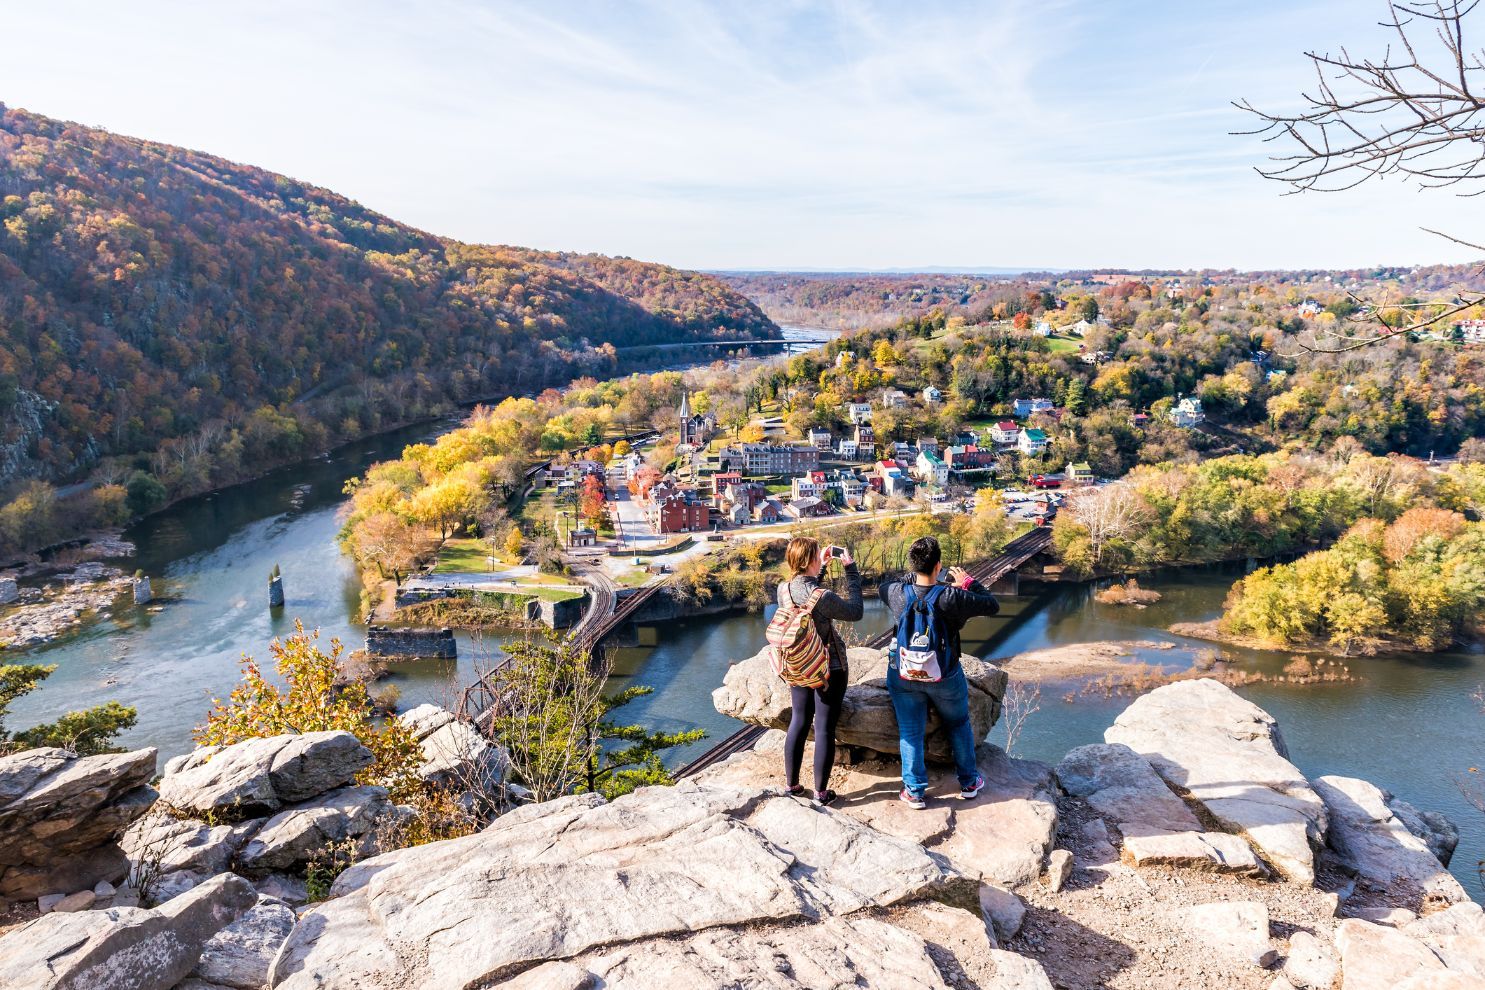 The view over Harpers Ferry, the spiritual halfway point of the Appalachian Trail. Photo: Getty